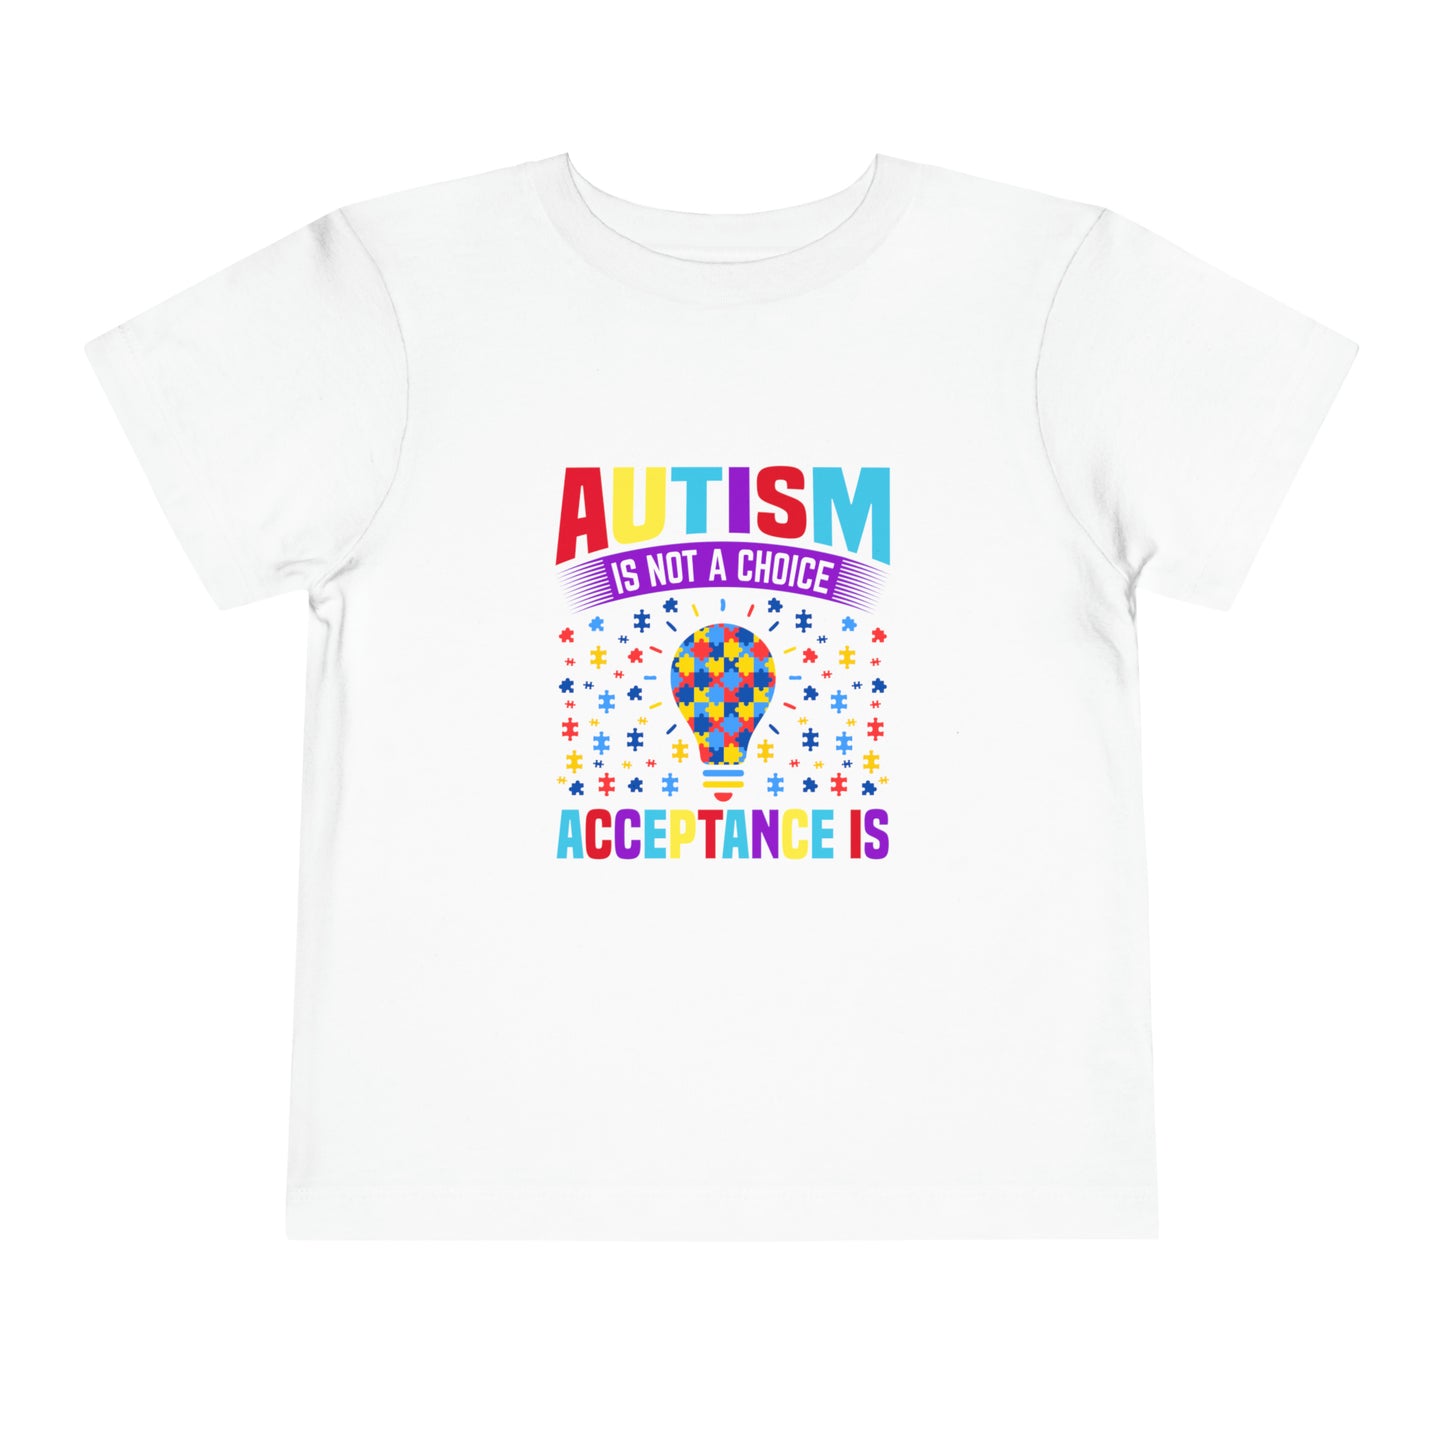 Autism Acceptance Awareness Advocate Toddler Short Sleeve Tee